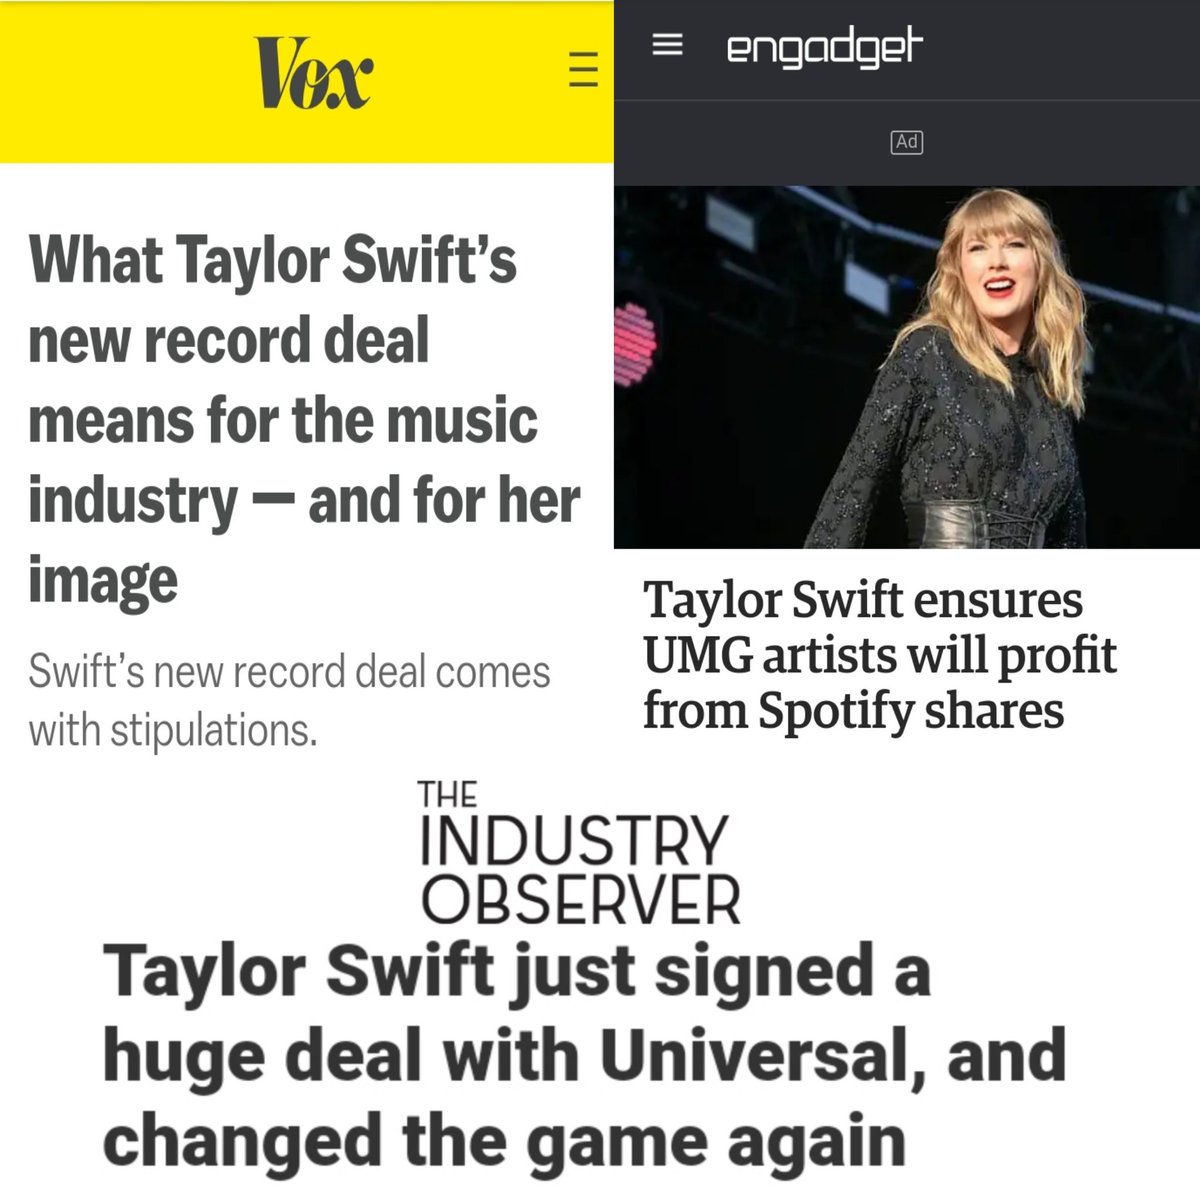 In 2019, Taylor Swift signed a global deal with Universal and Republic that secured a guarantee from the label that any sale of its Spotify shares would result in non-recoupable payments to all artists on its roster and will never have unpaid or underpaid royalties from streams.